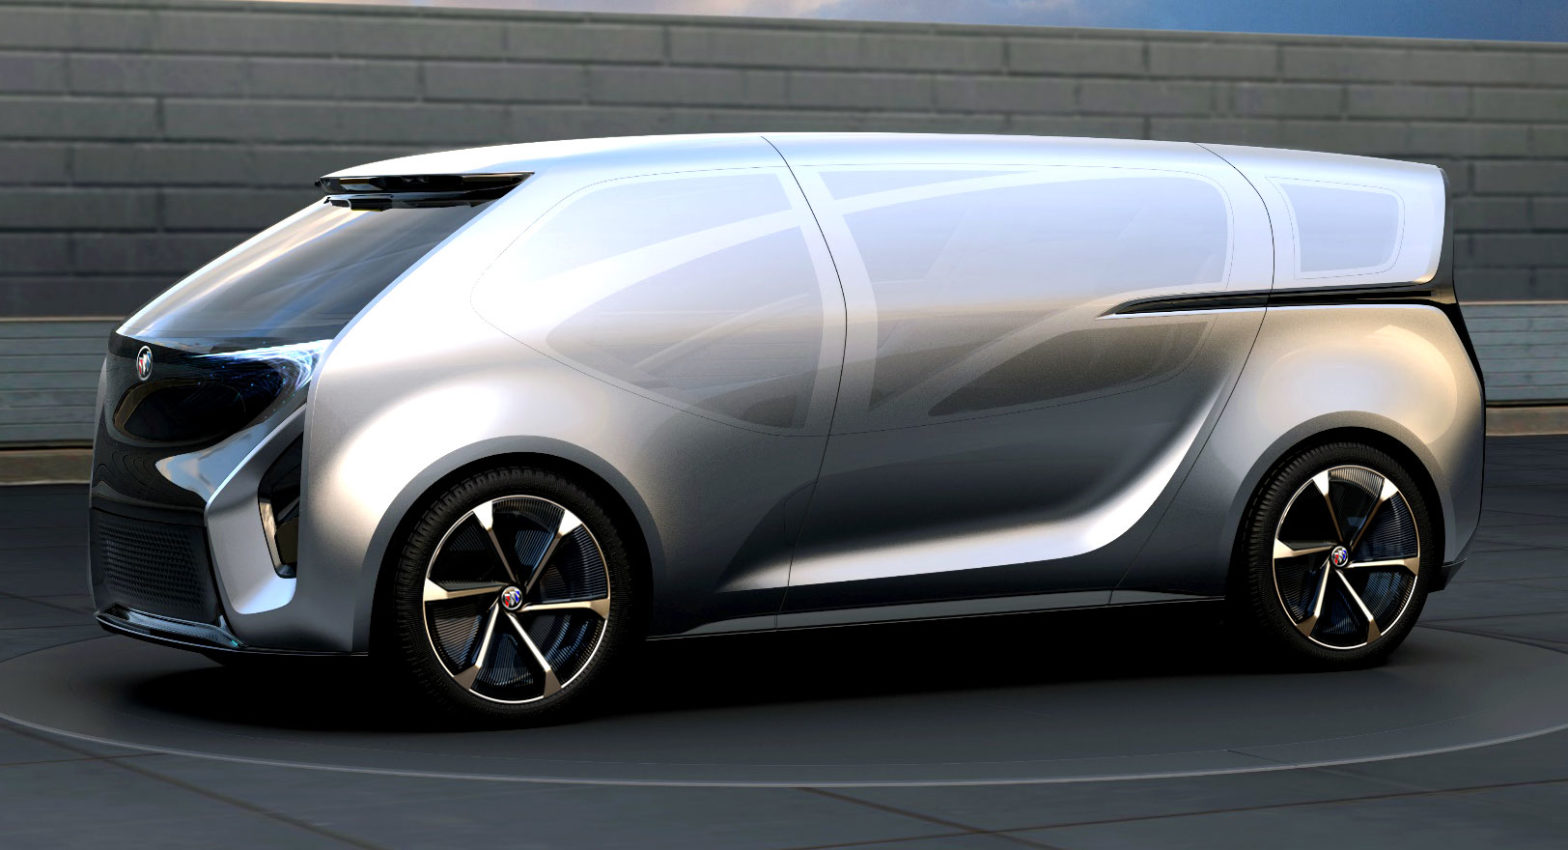 Buick Smart Pod Is A Futuristic Luxury Minivan Concept That Could’ve Been Designed By Porsche